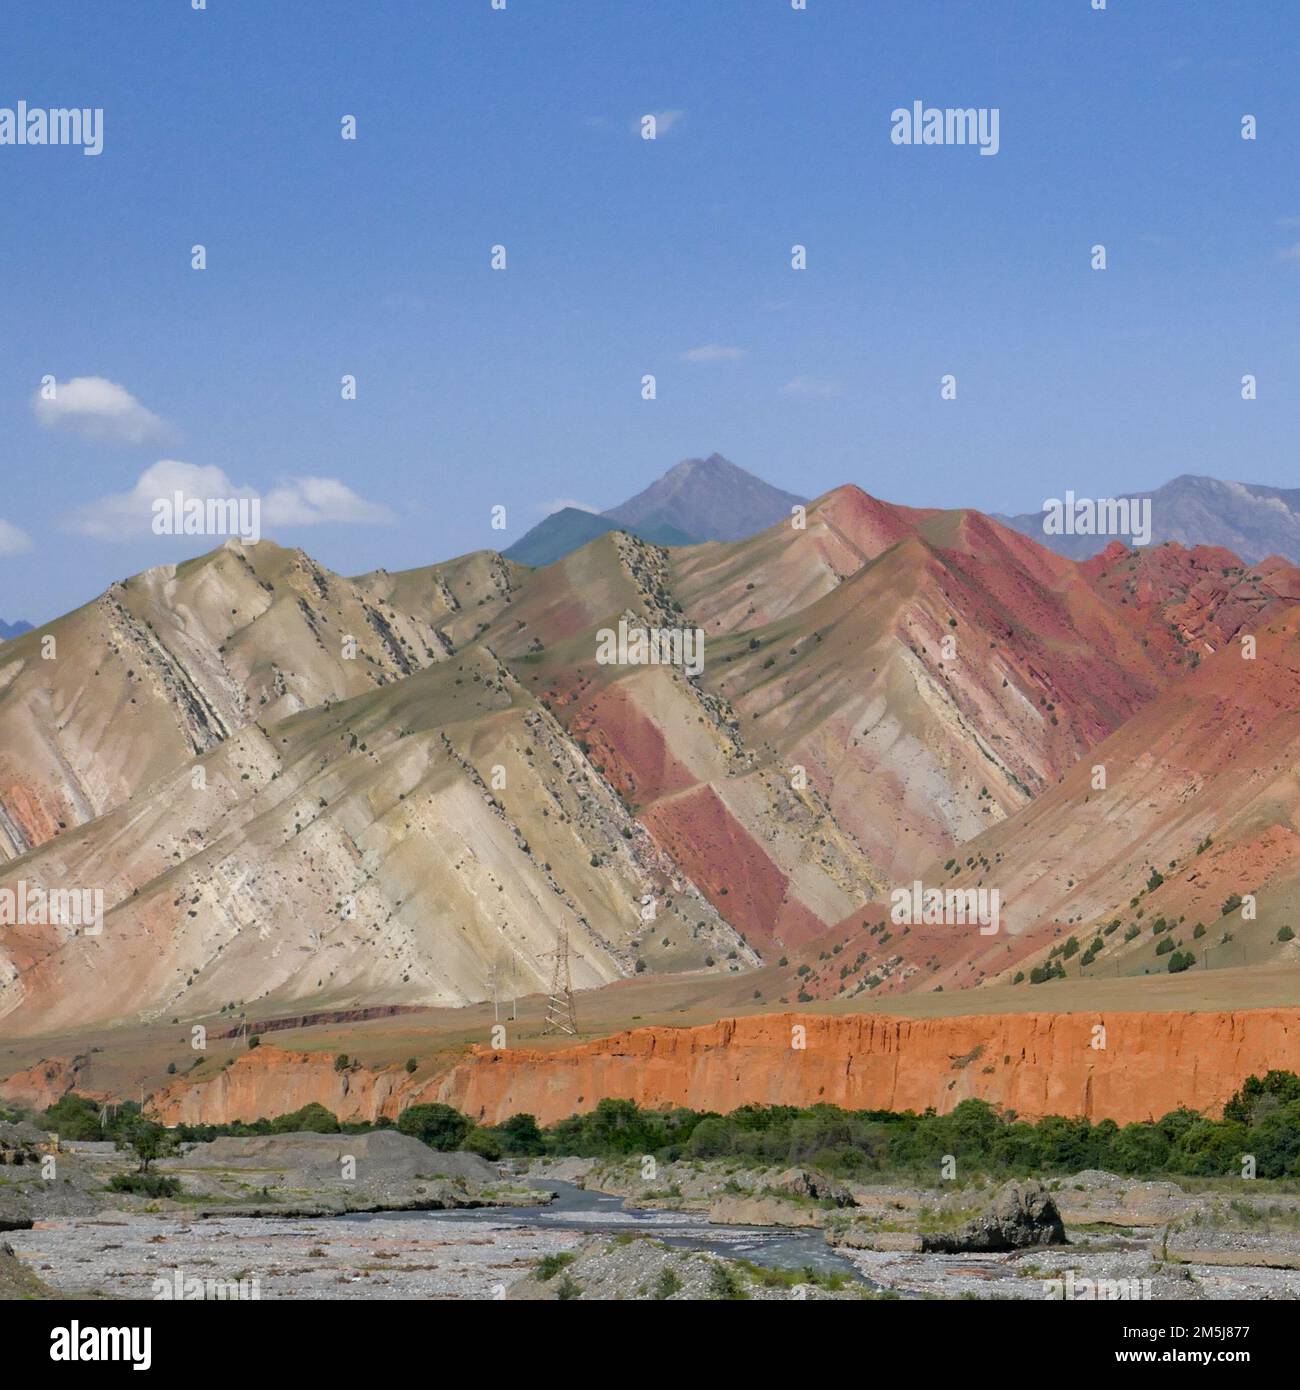 Landscape view of colorful red and orange rock strata in the Alay or Alai mountain range along Pamir Highway, Gulcha river valley, southern Kyrgyzstan Stock Photo